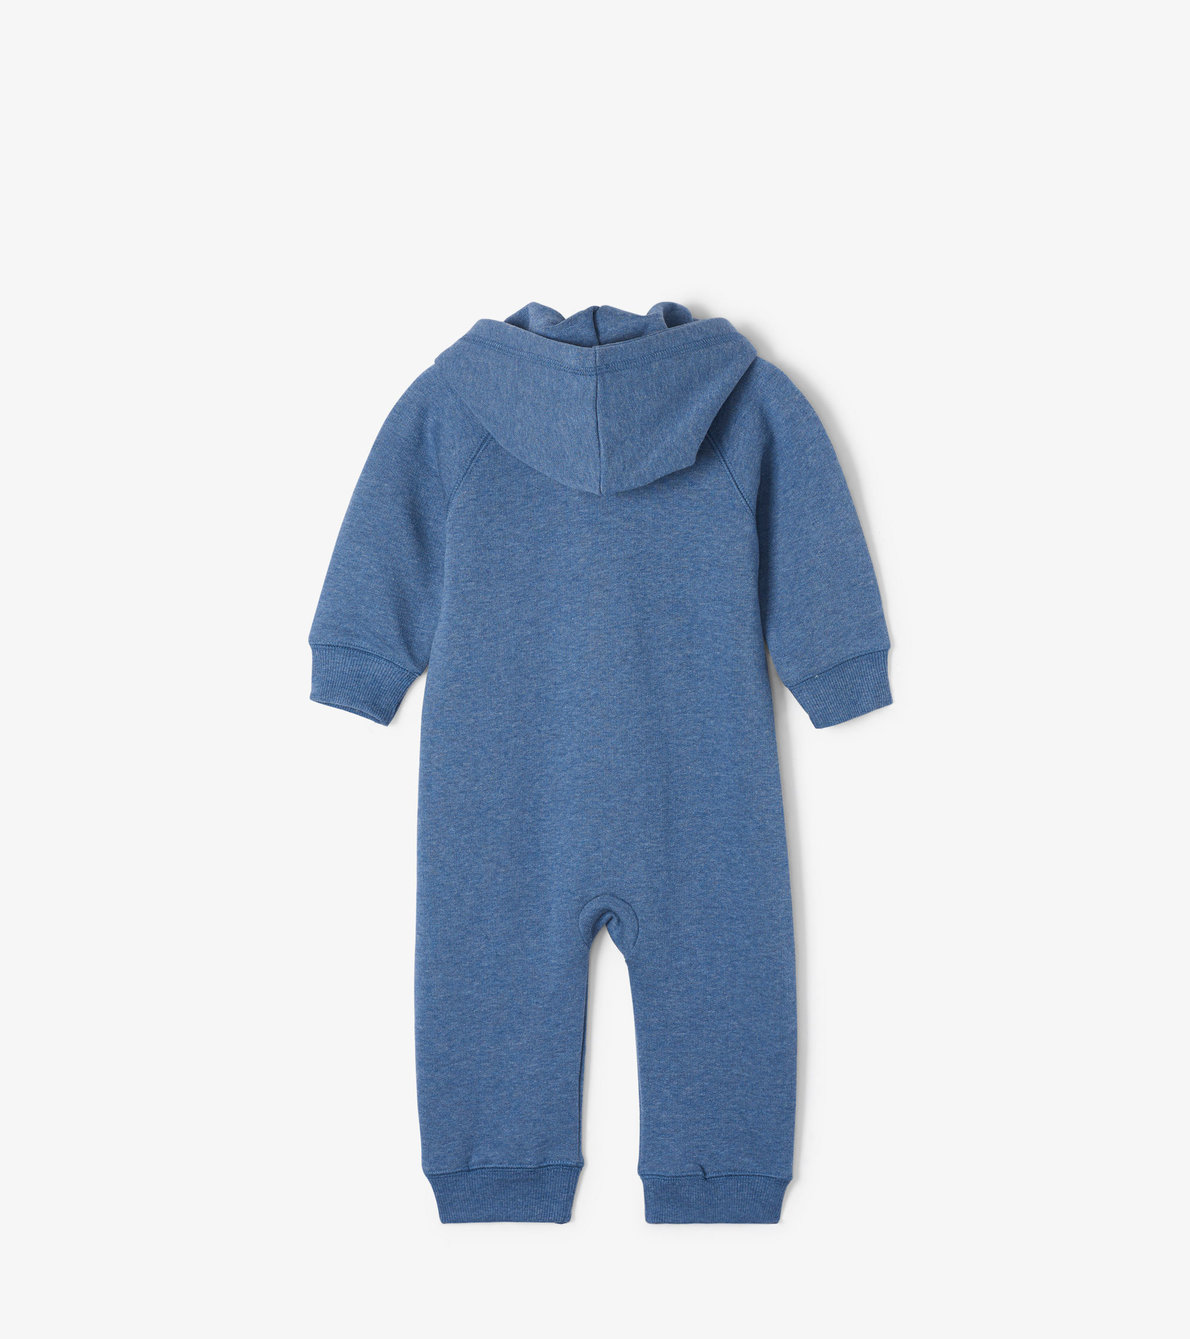 View larger image of Navy Bear Baby Heritage Hooded Romper